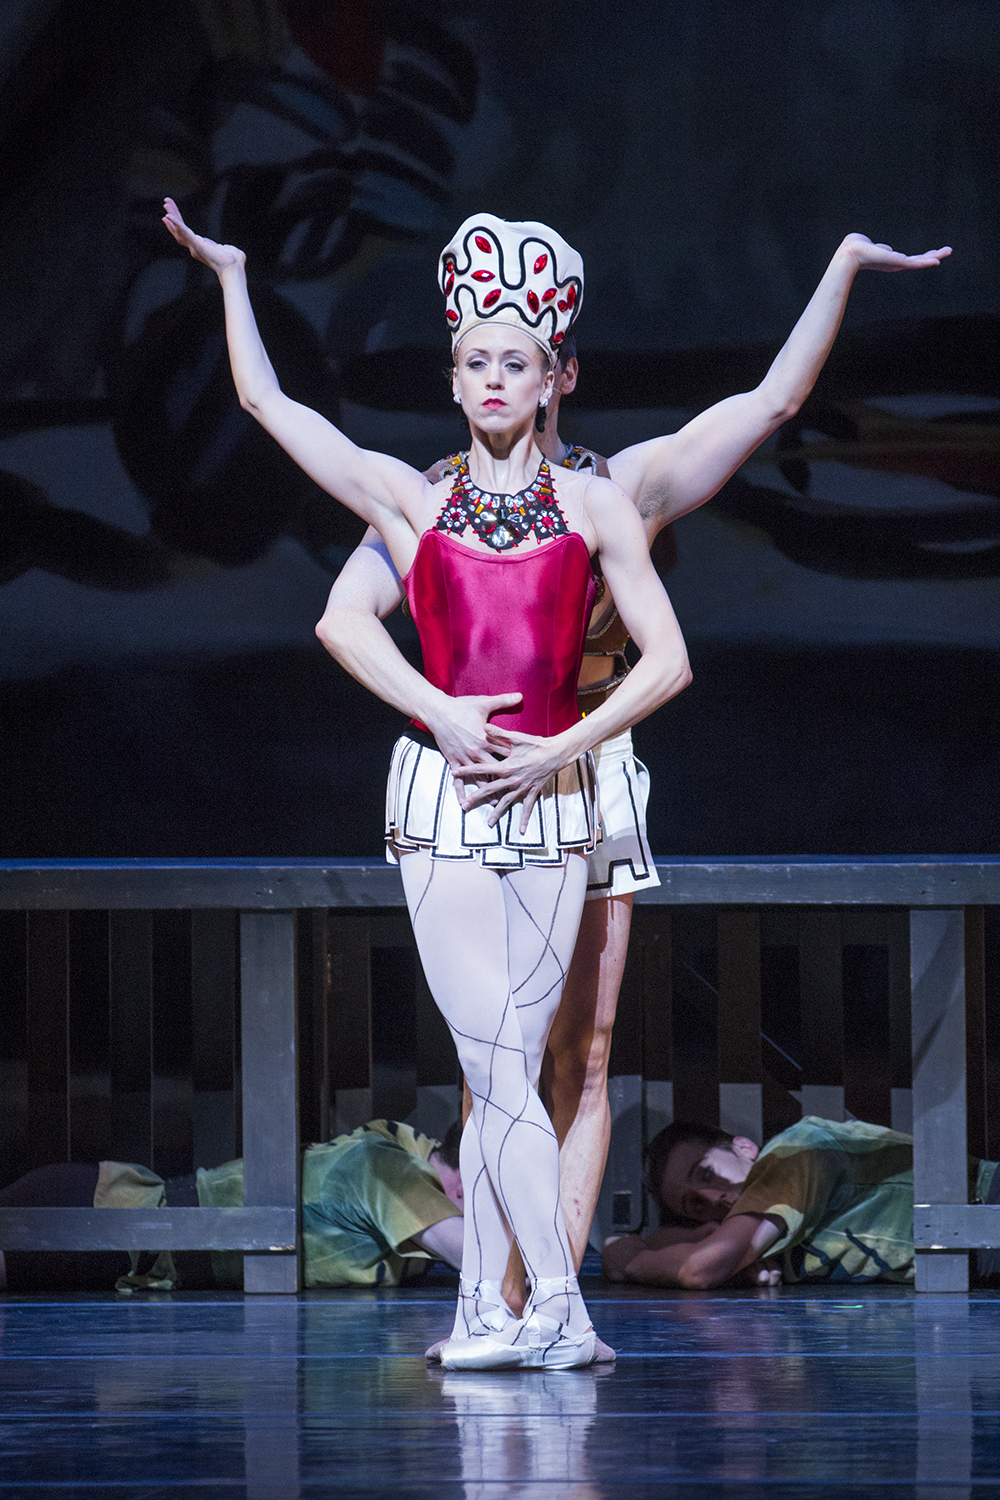 Lesley Rausch as the Siren in Balanchine's "Prodigal Son." Photo by Lindsay Thomas.